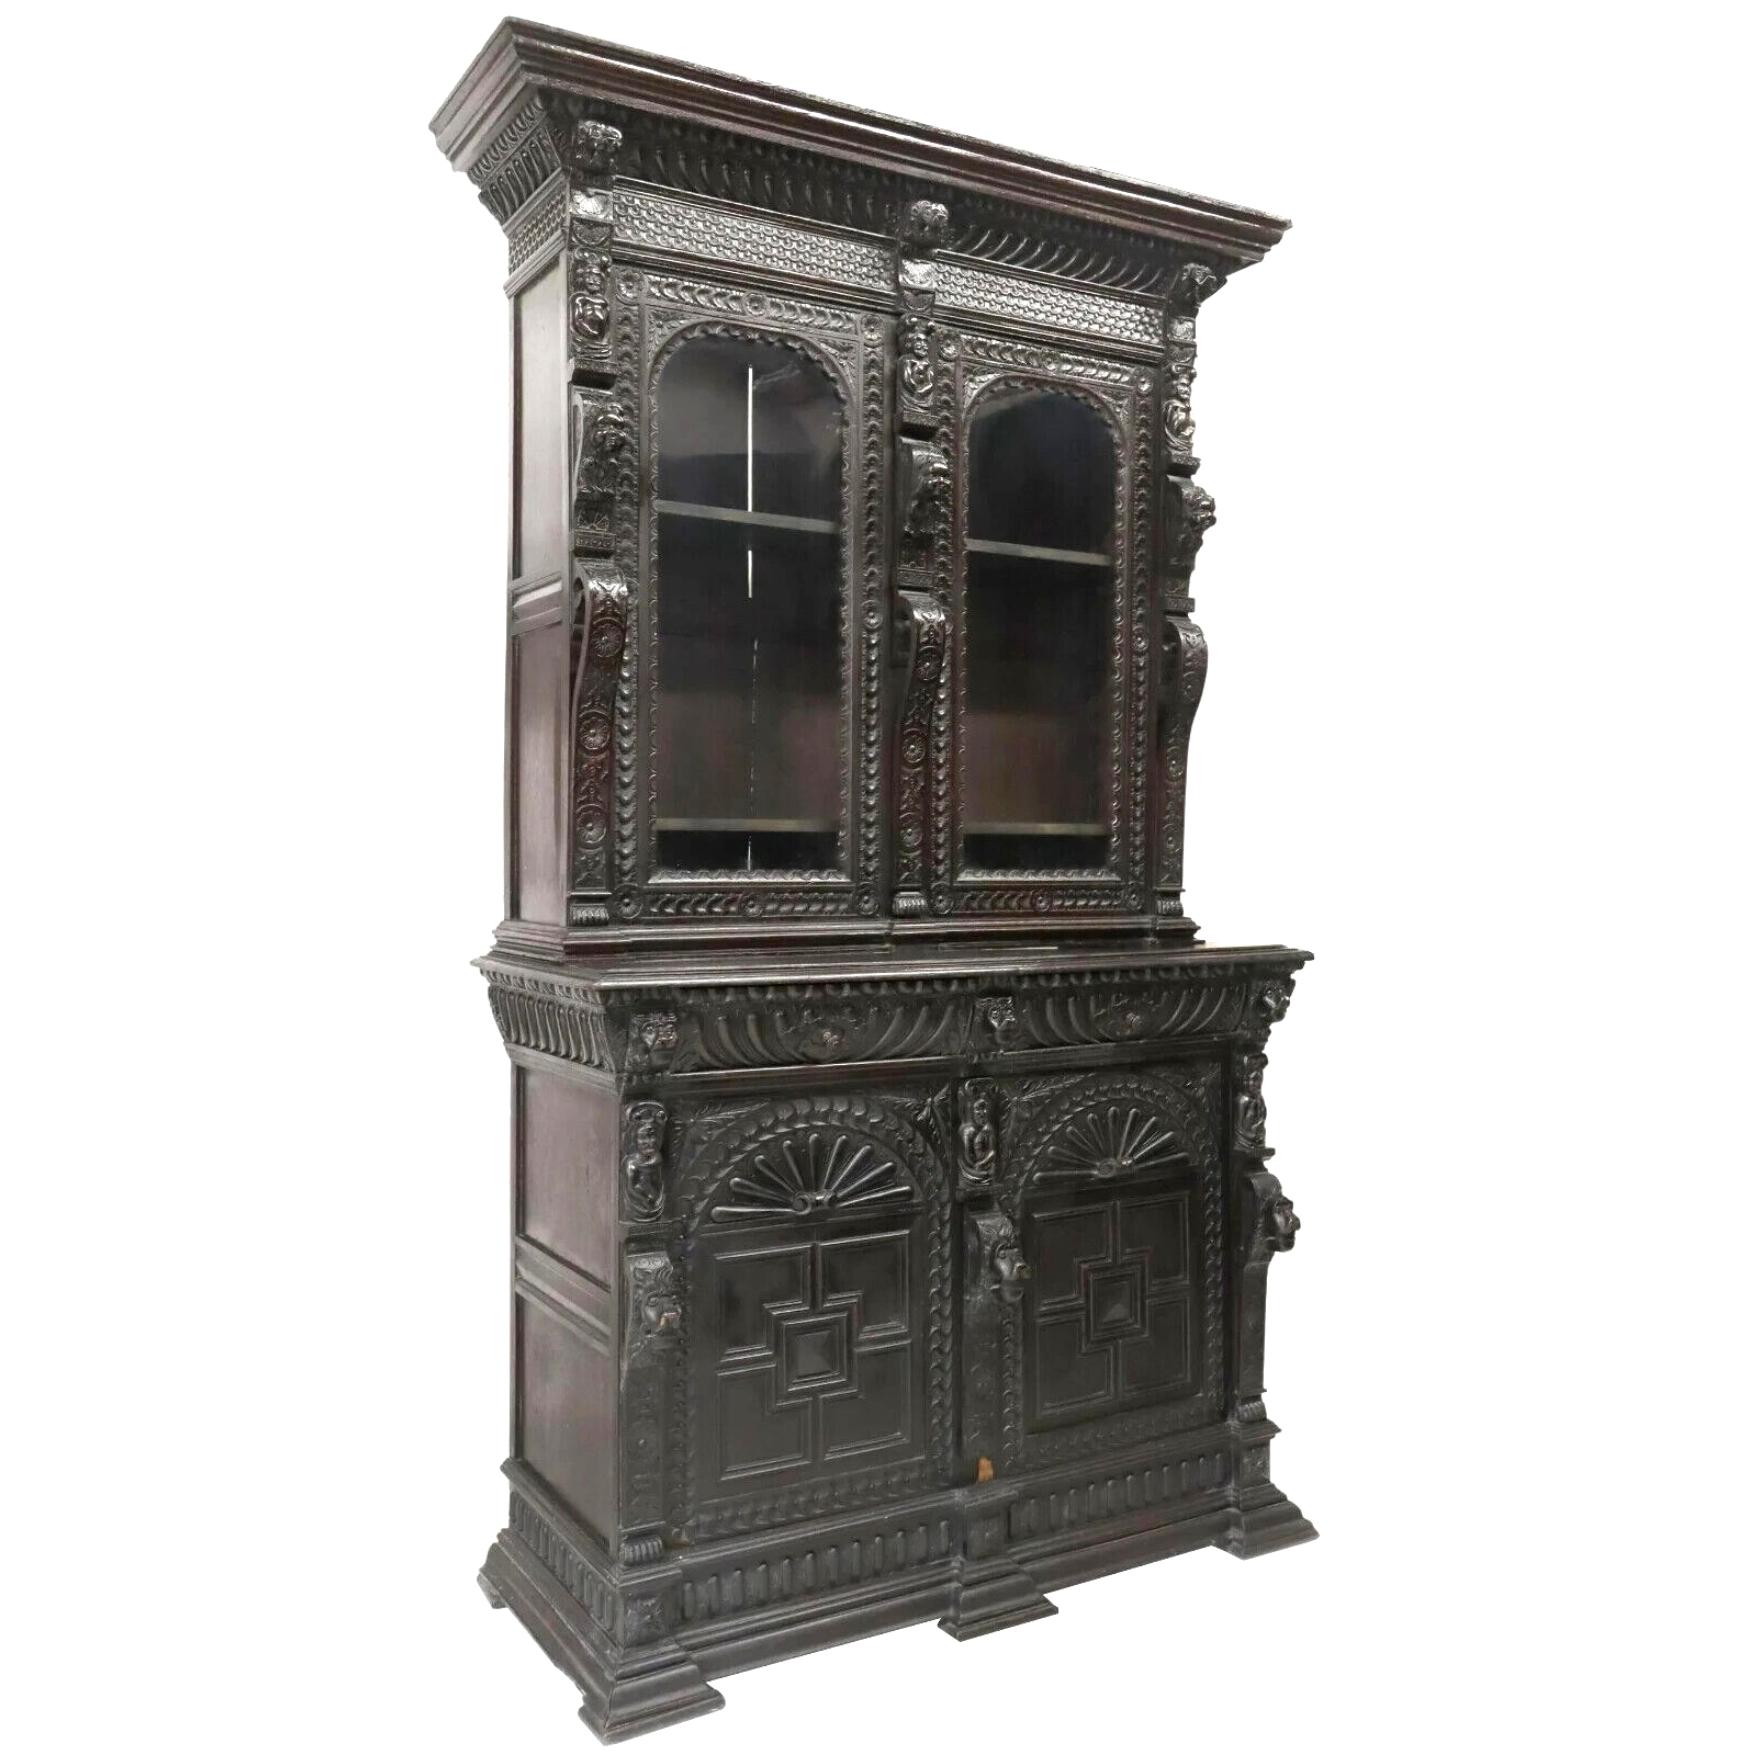 Exceptional Antique Sideboard, English, Heavily Carved, Ebonized, Oak, 1800's, 19th Century!!

English heavily carved ebonized oak sideboard, 19th c., molded cornice, over dual glazed doors, case fitted with two drawers, above two cabinets, opening